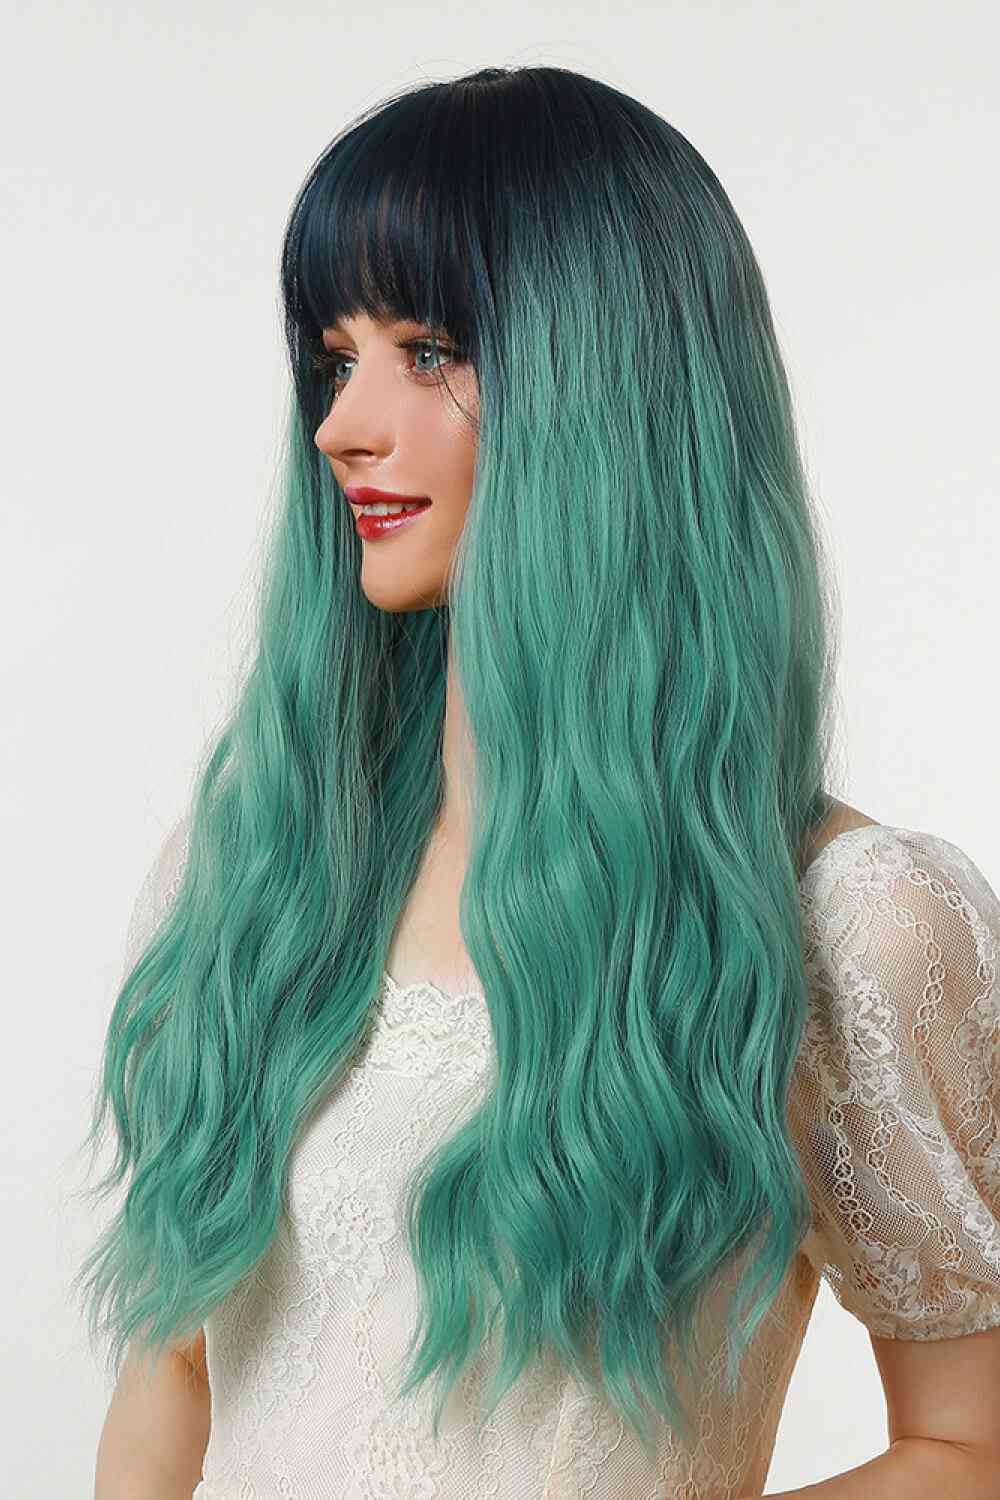 13*1" Full-Machine Wigs Synthetic Long Wave 26" in Seafoam Ombre - lolaluxeshop